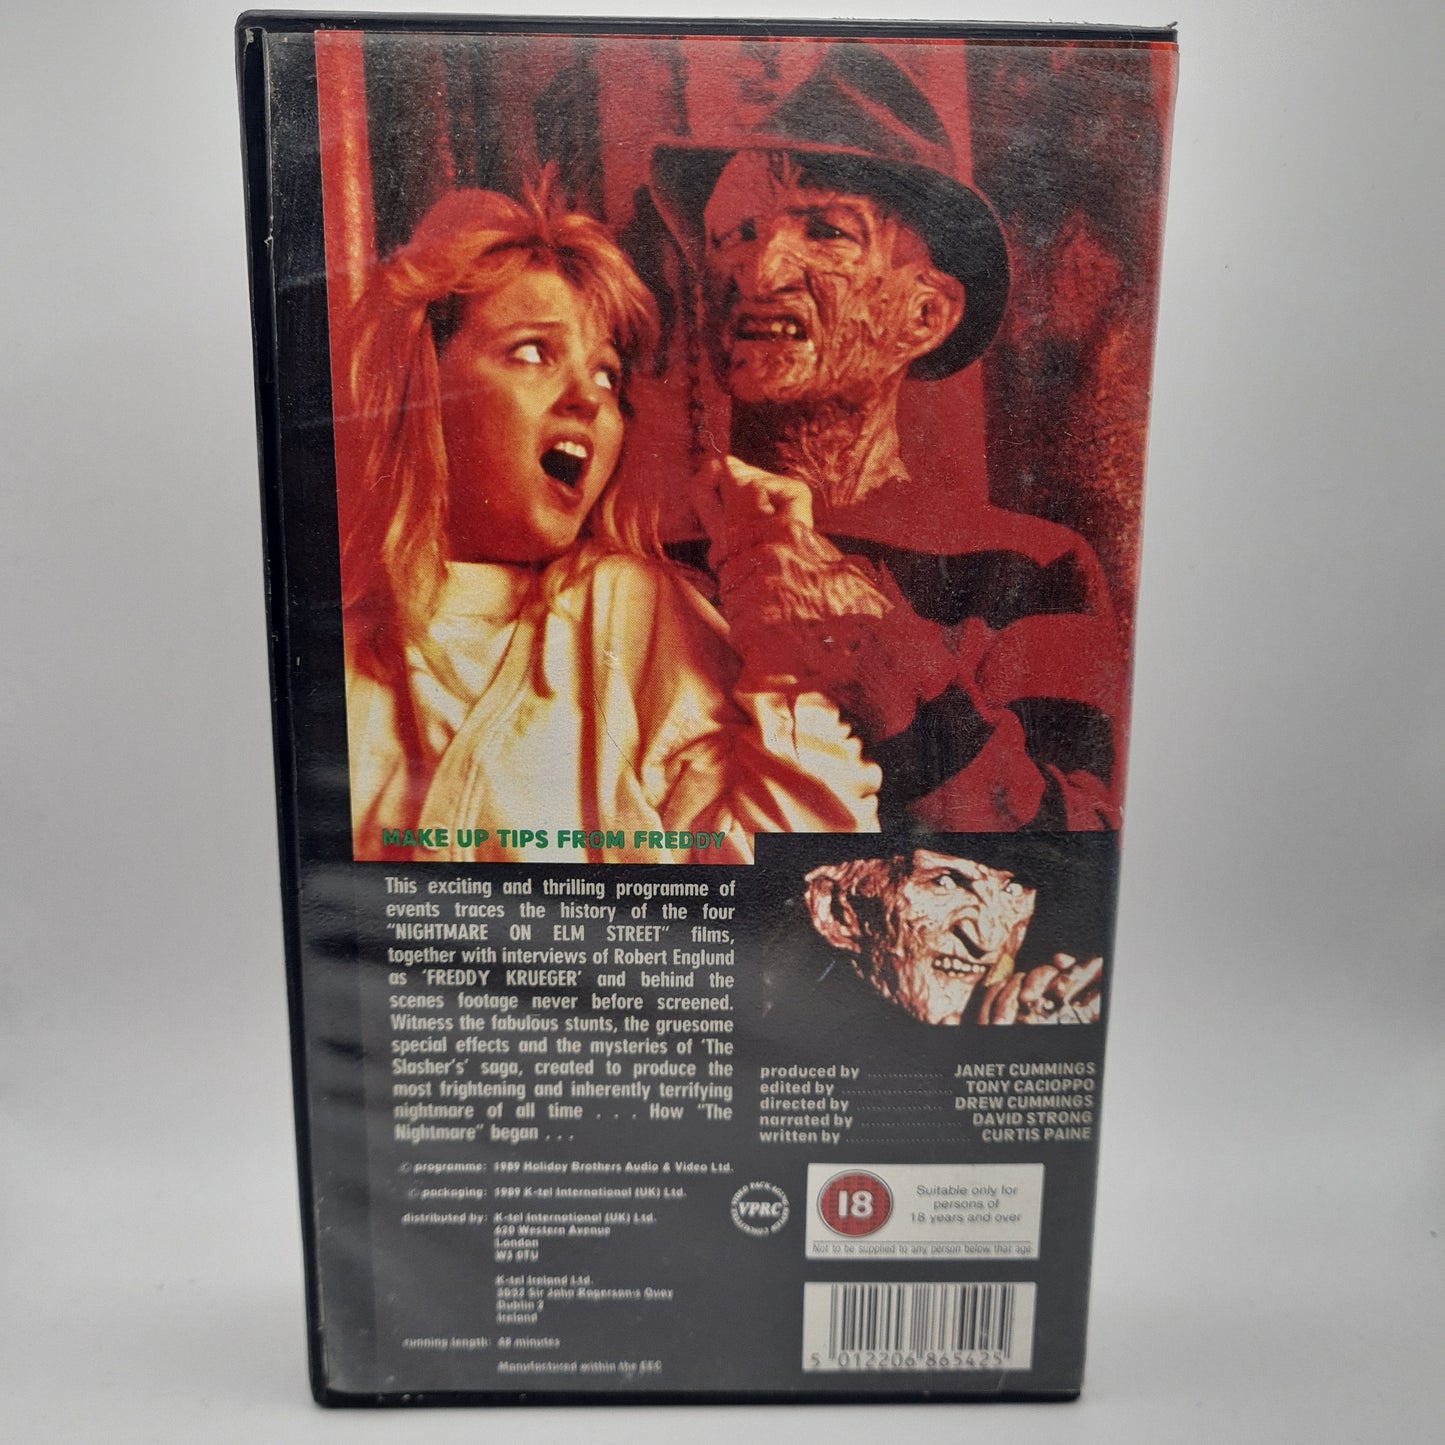 Elm Street: The Making of a Nightmare VHS